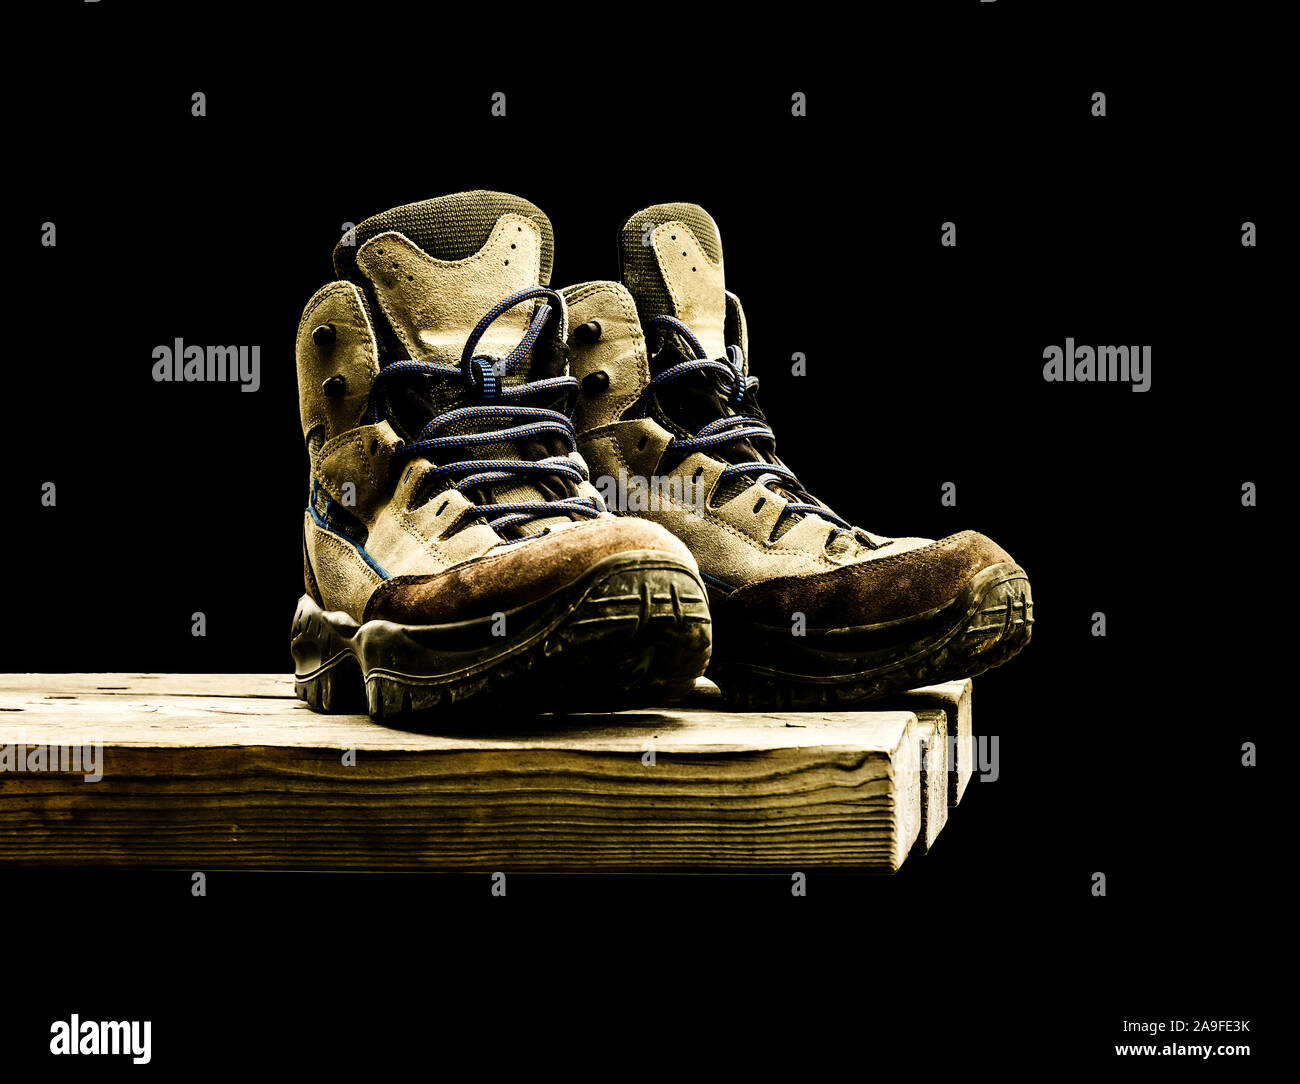 Hiking boots on wooden board against black background Stock Photo